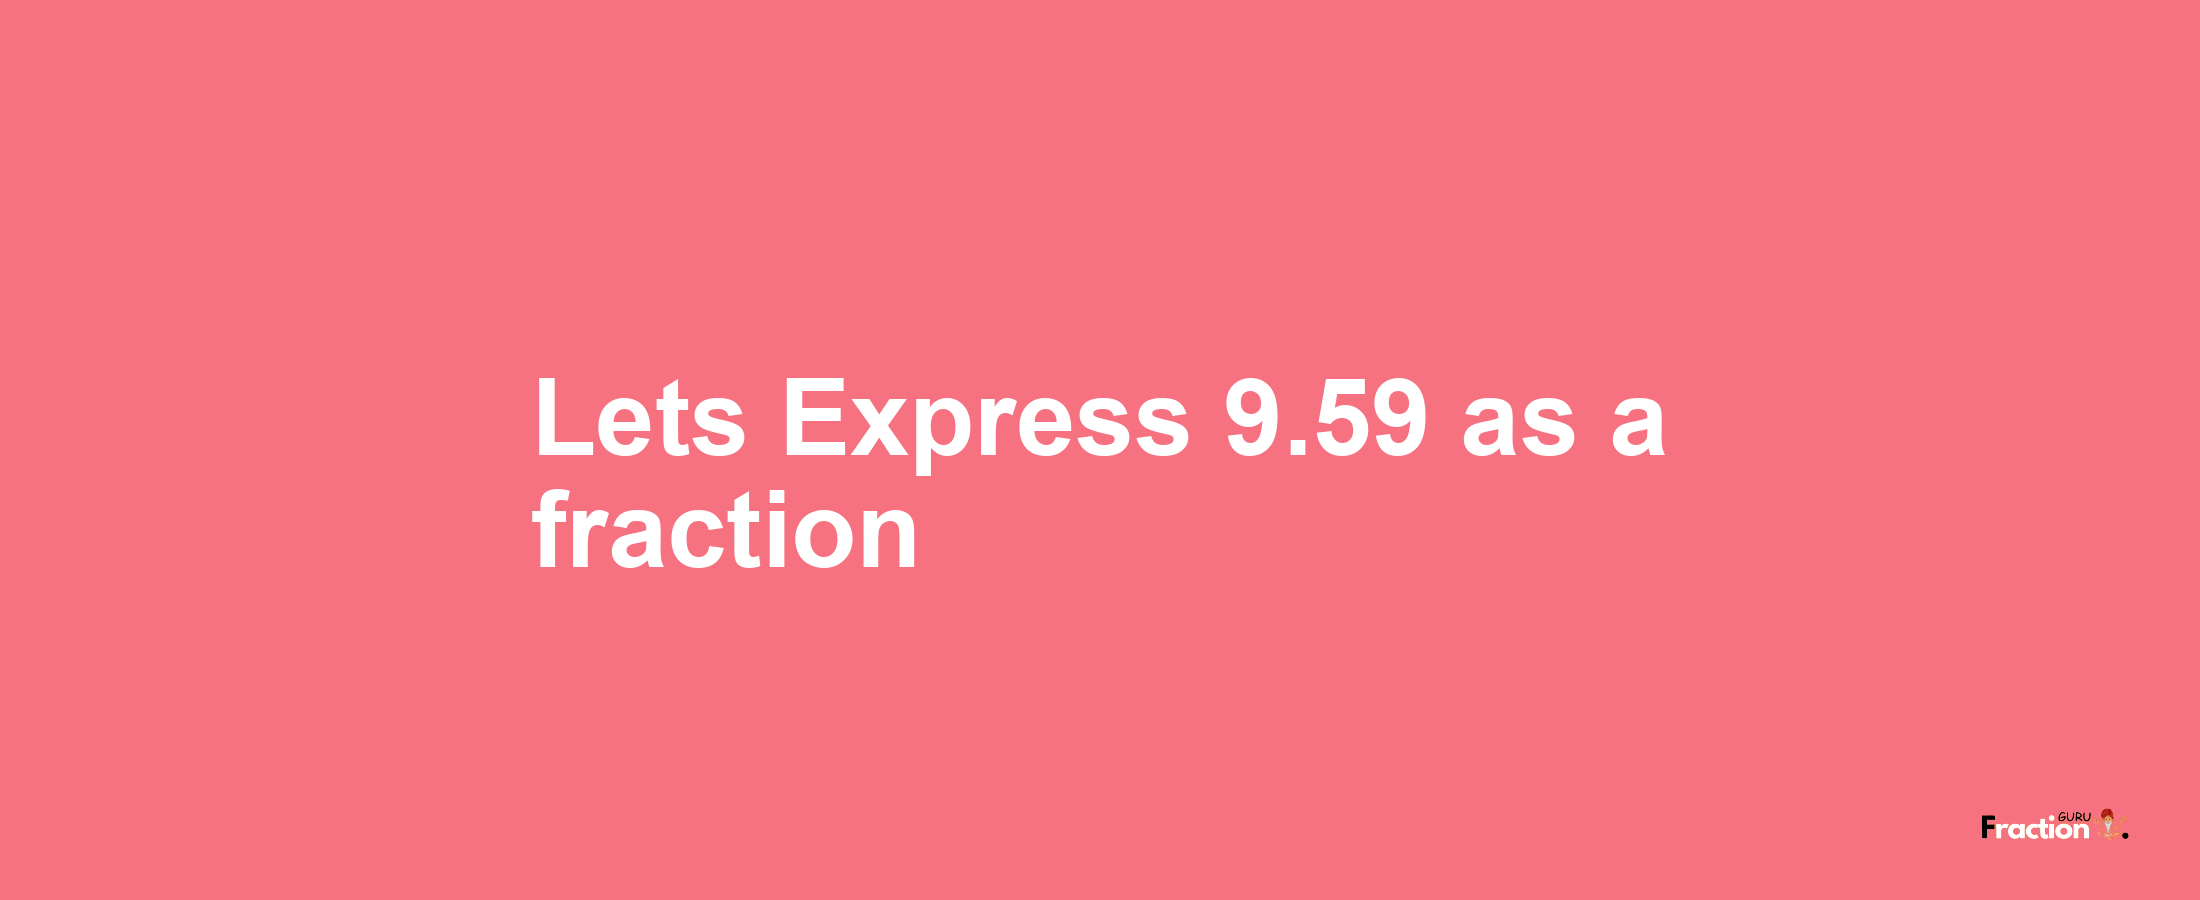 Lets Express 9.59 as afraction